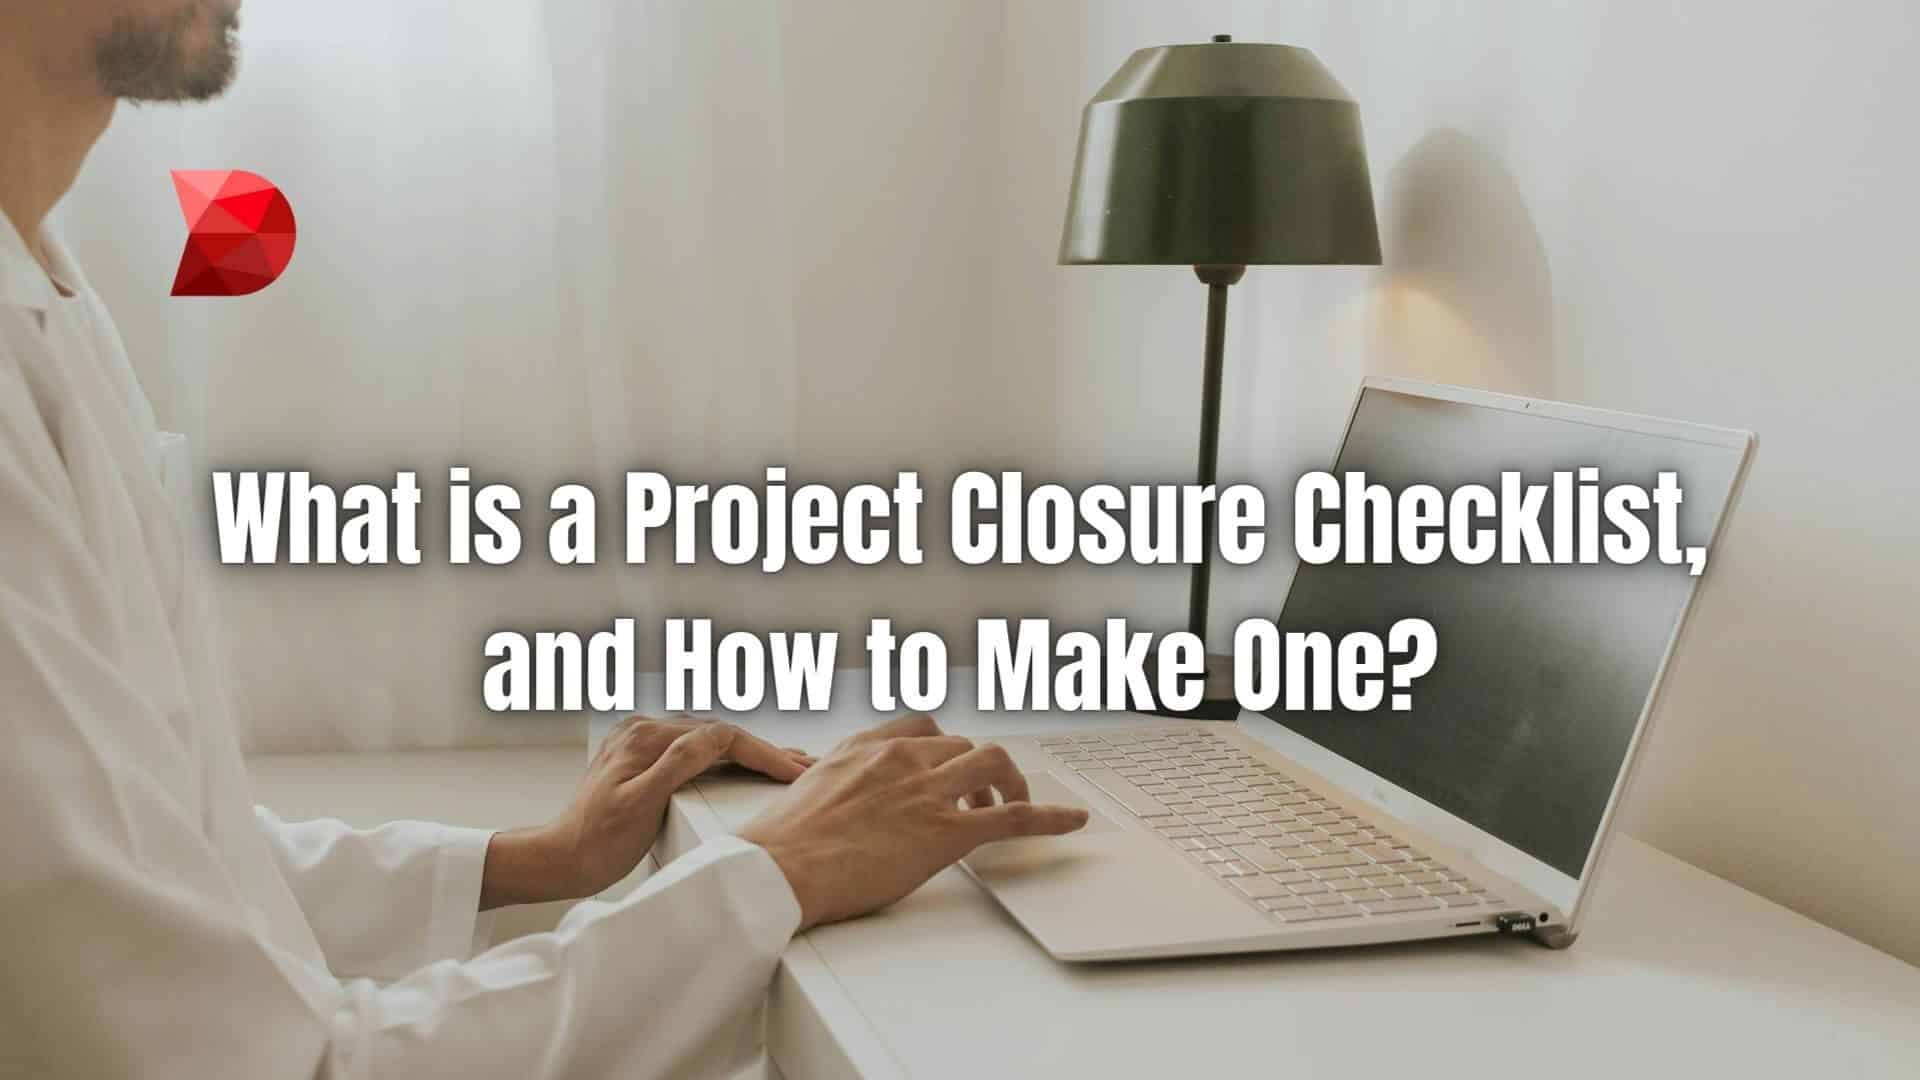 Unlock the secrets to creating an effective project closure checklist. Learn the crucial elements and strategies to wrap up your projects.